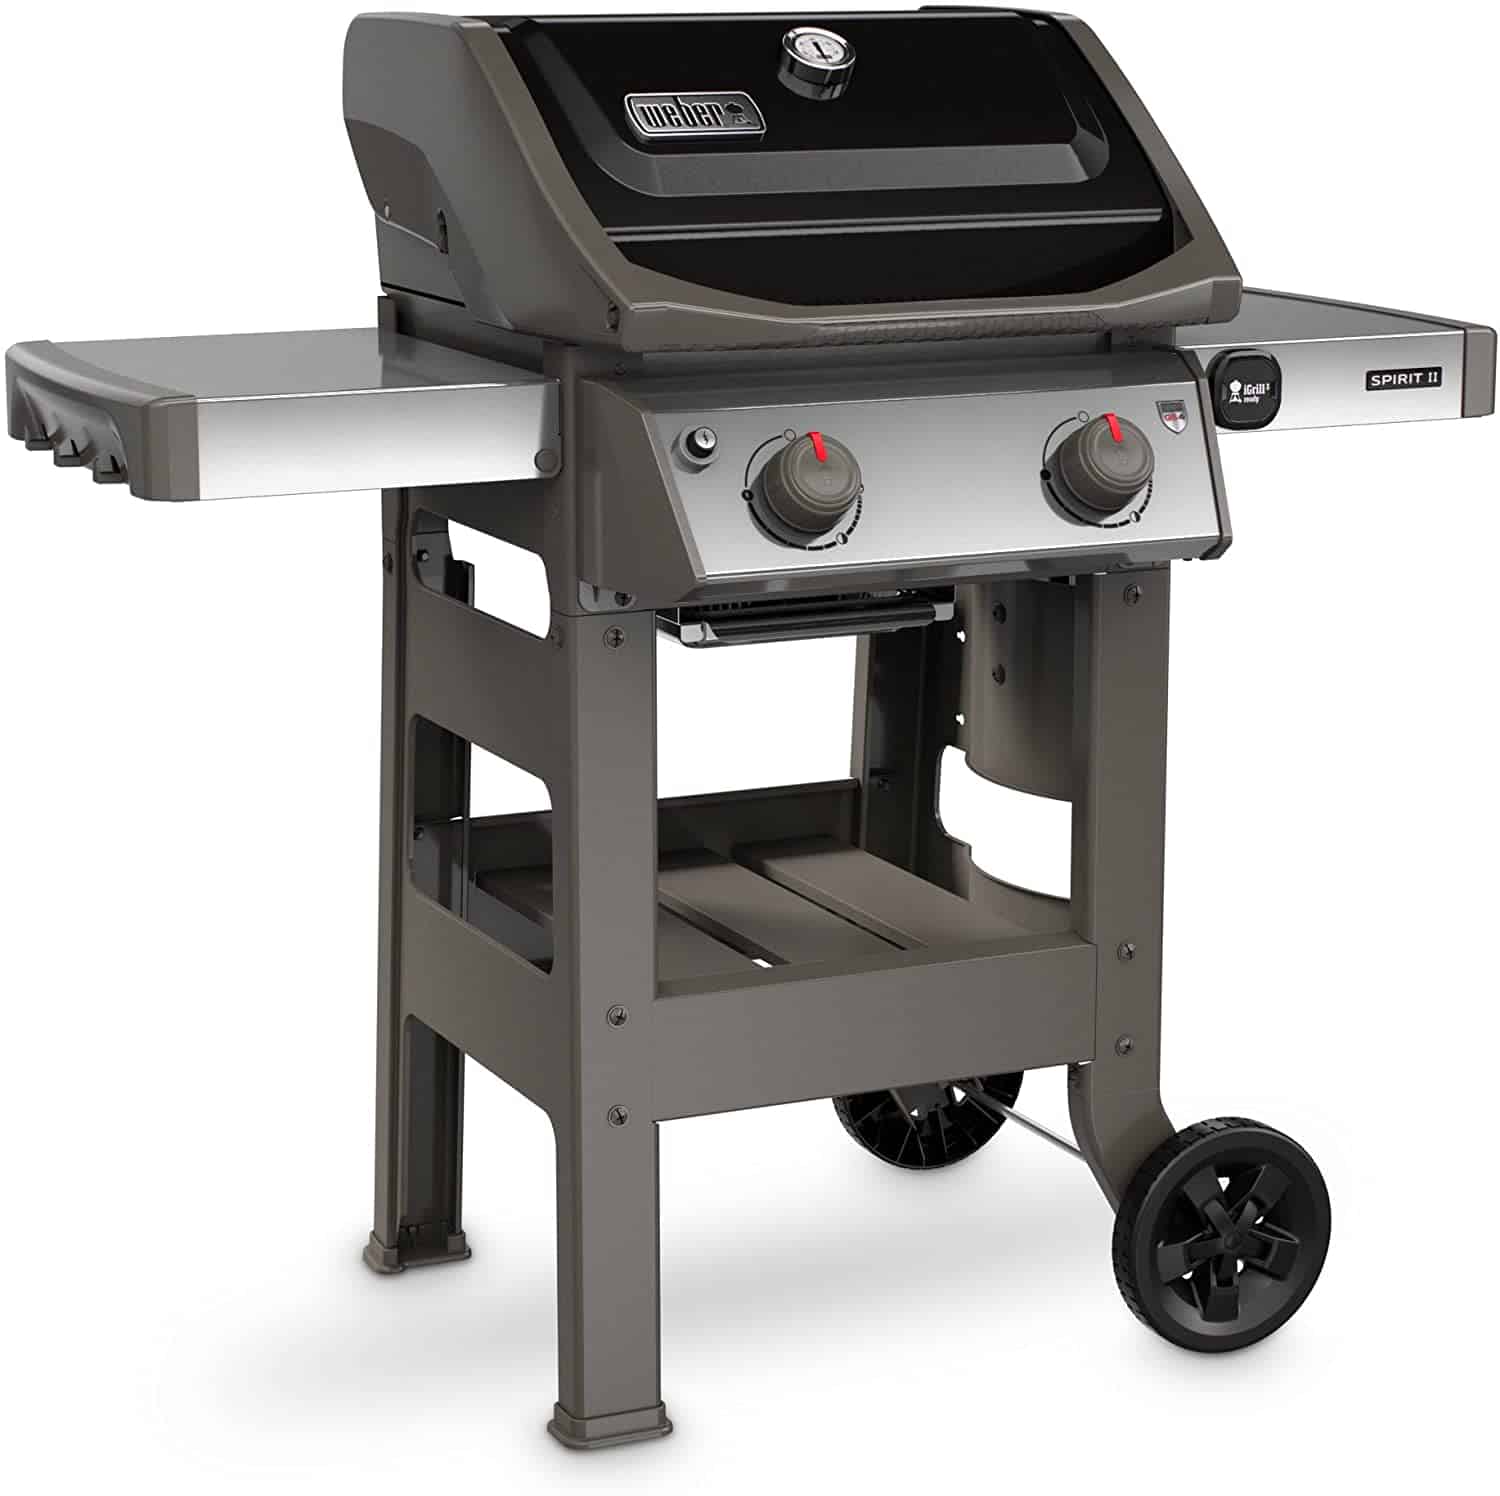 Best small gas grill for limited space- Weber Spirit II E-210